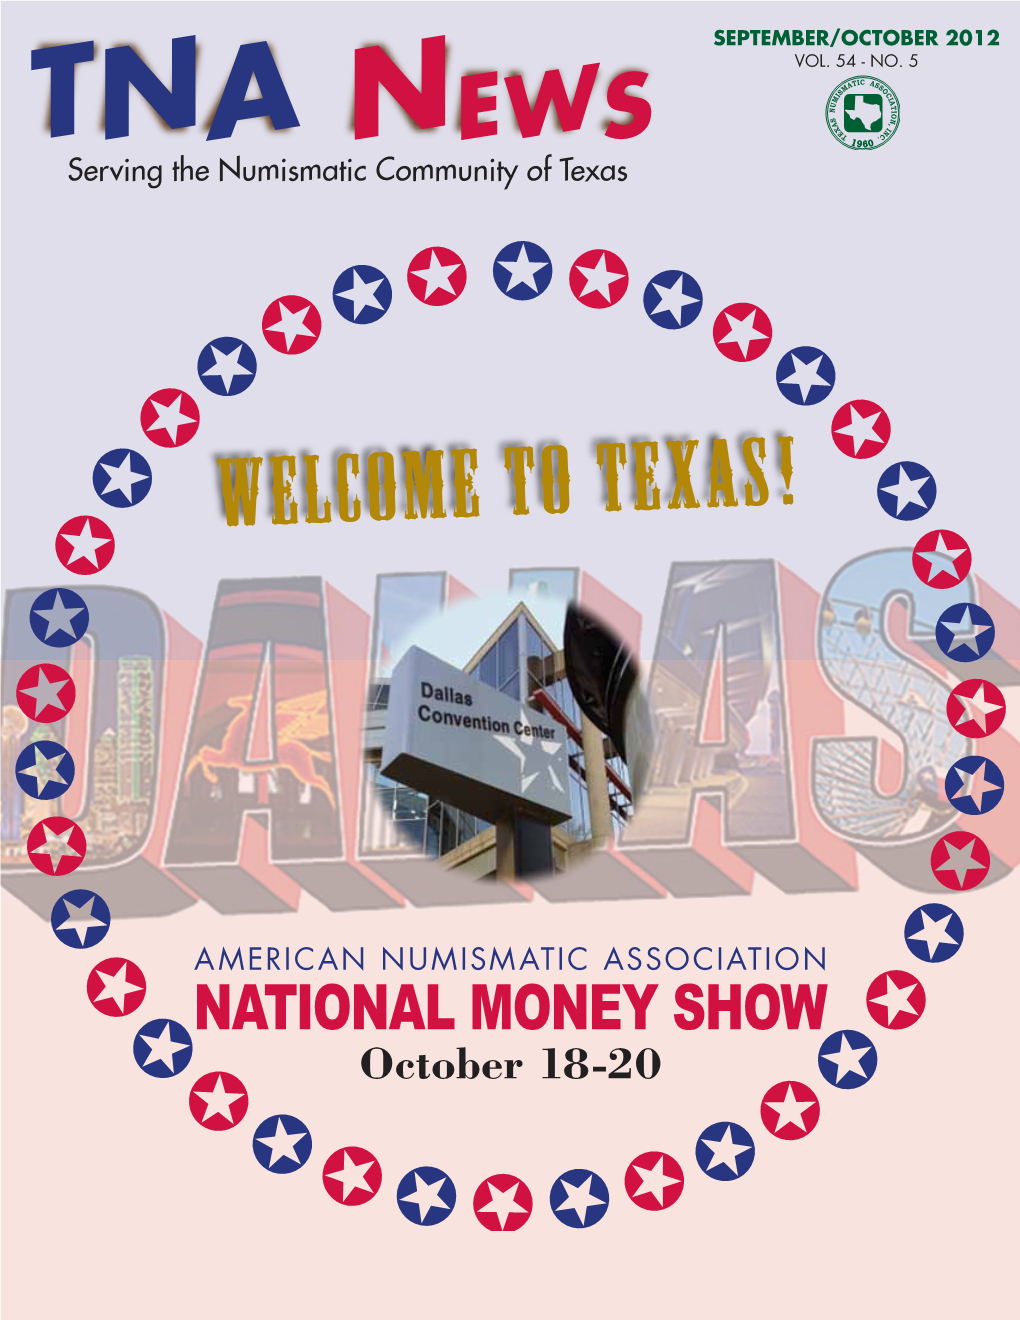 Serving the Numismatic Community of Texas